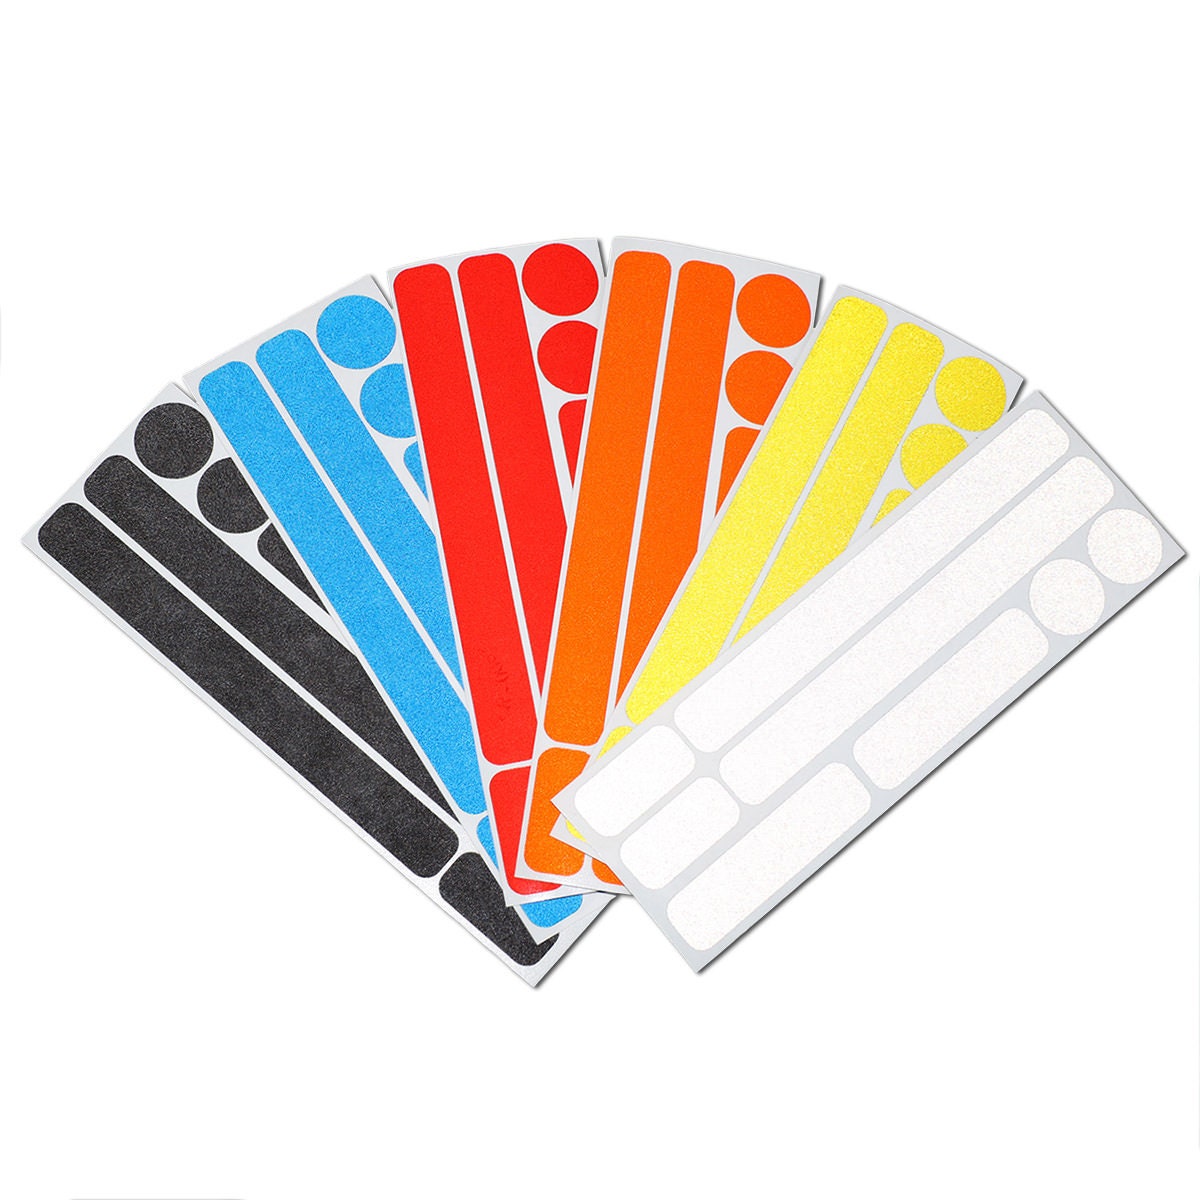 Reflective Stickers Decal Set, Safety Stickers, Reflective Decals for  Bicycles, Helmets, Vehicles, Strollers, Wheelchairs, Scooters 